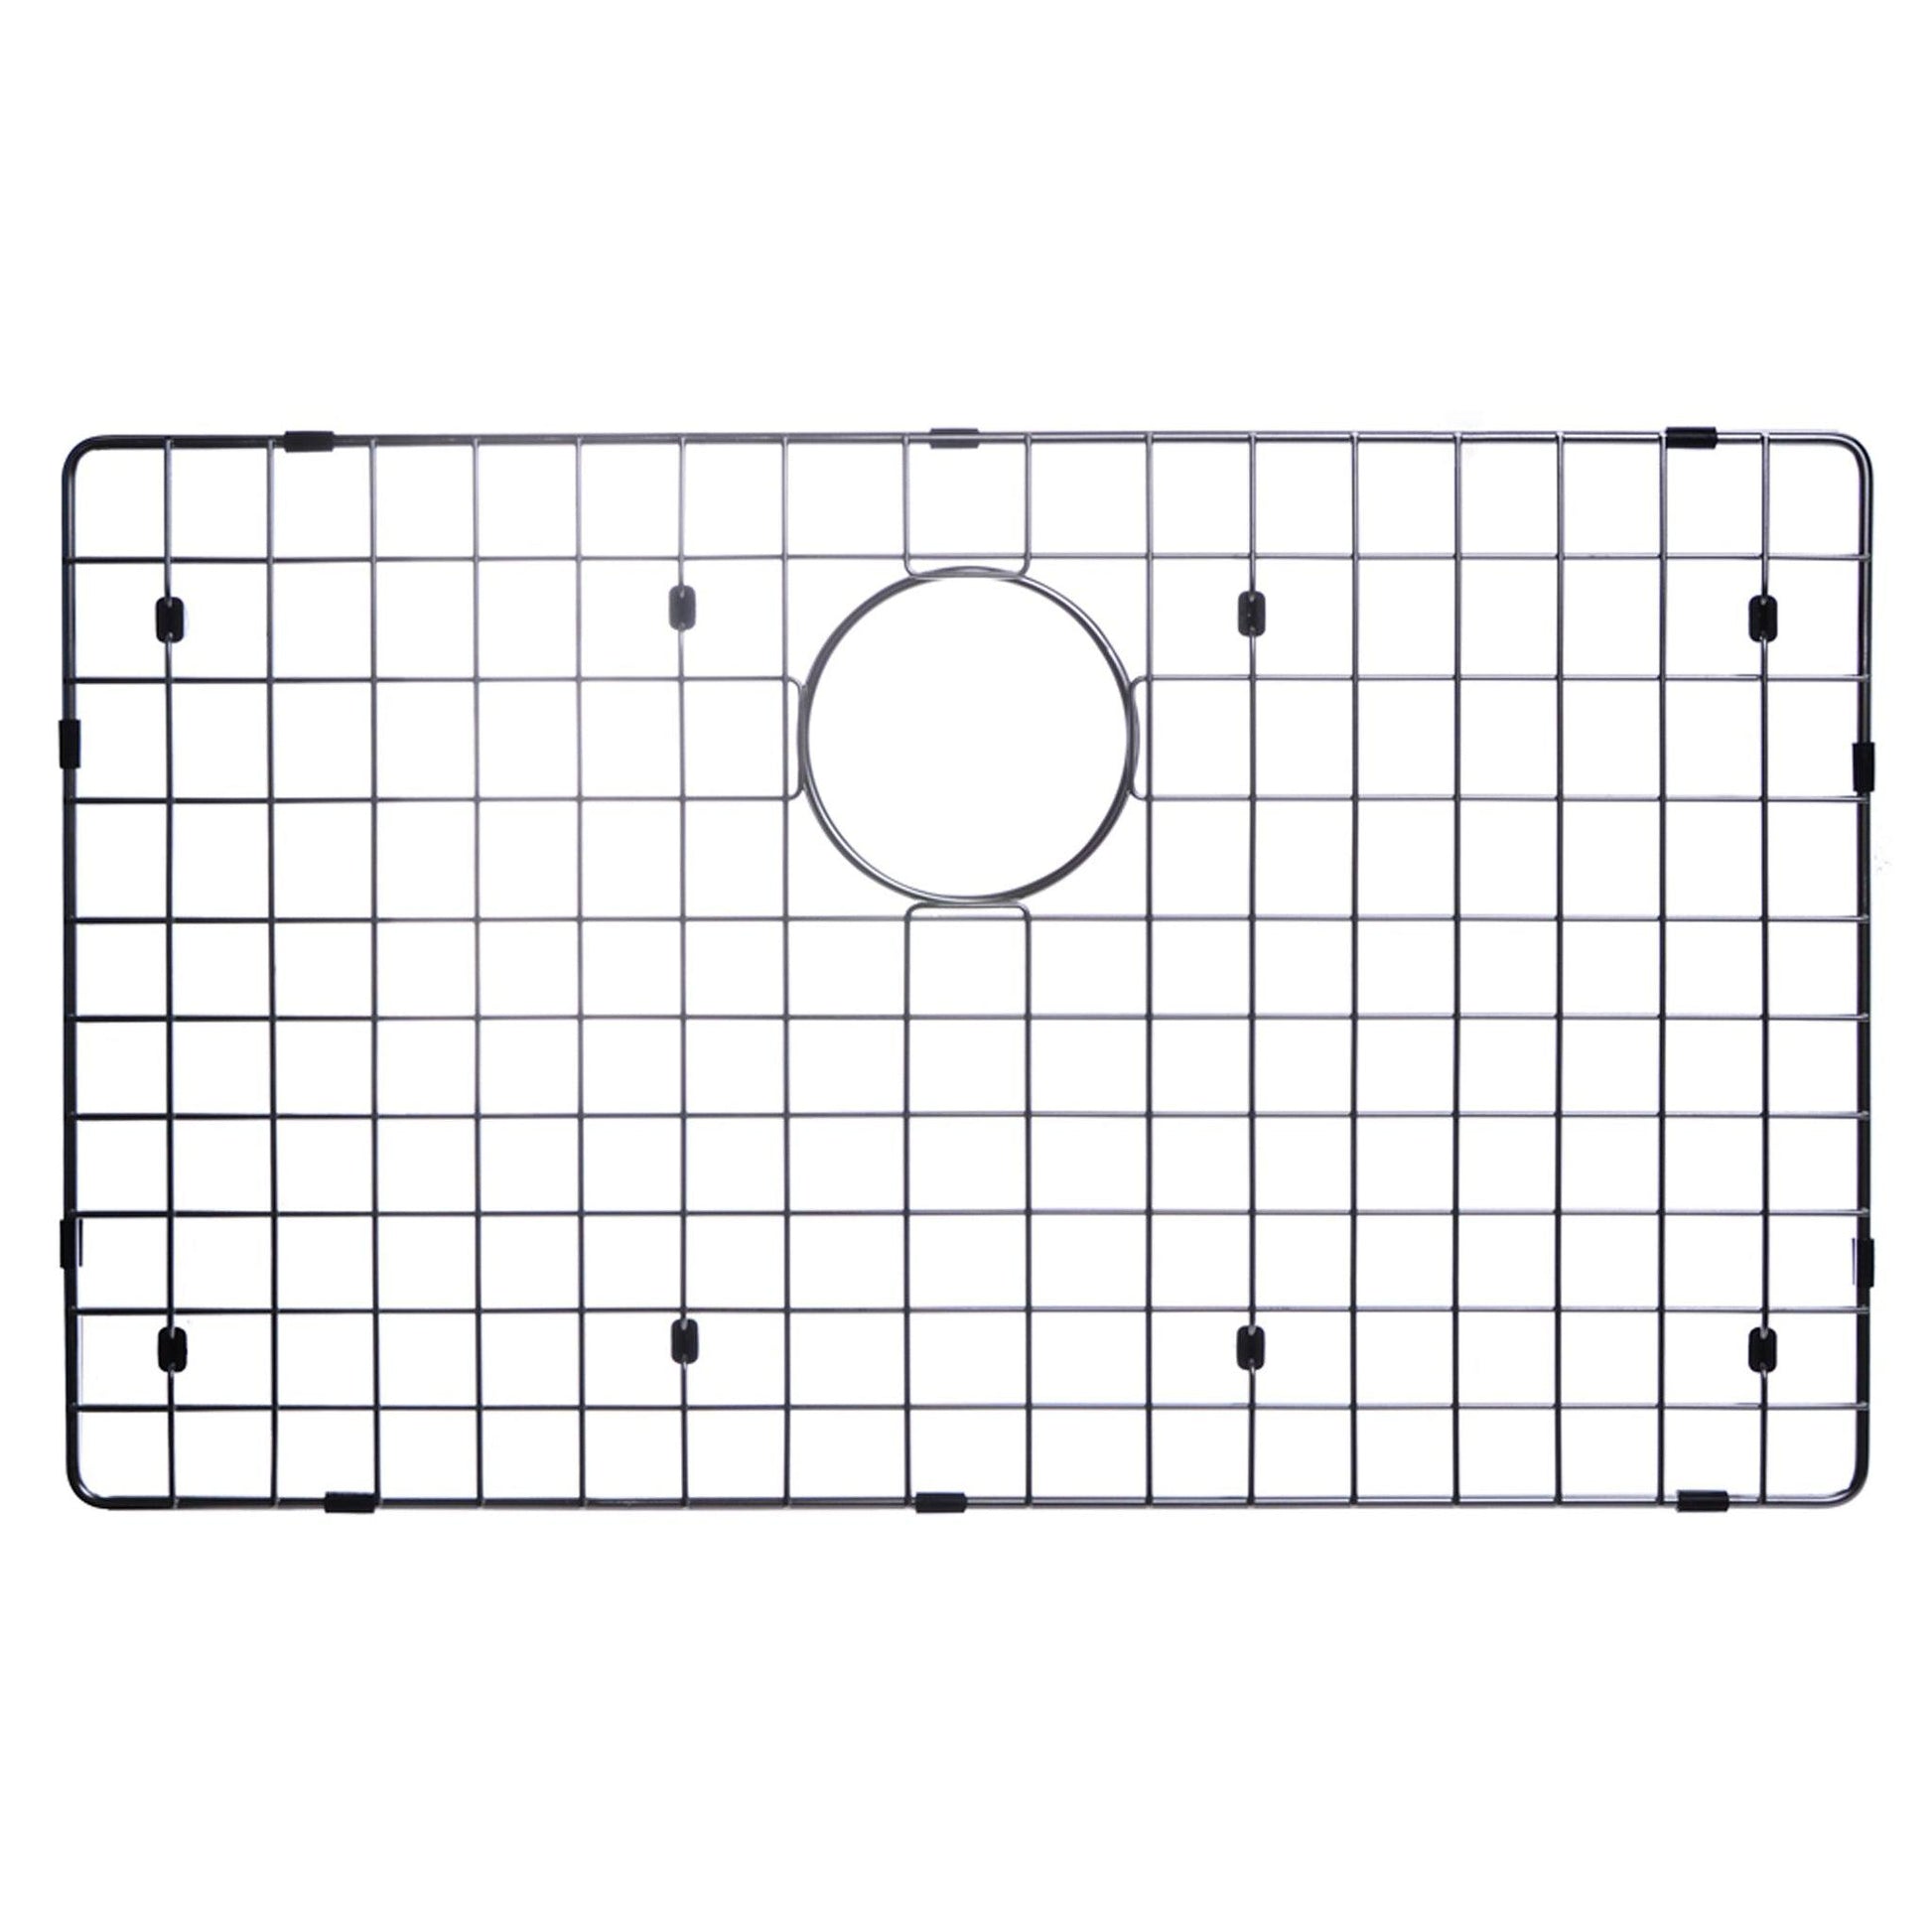 Water Creation Zero Radius Single Bowl Stainless Steel Hand Made Undermount 33 Inch X 19 Inch Sink With Drain, Strainer, And Bottom Grid